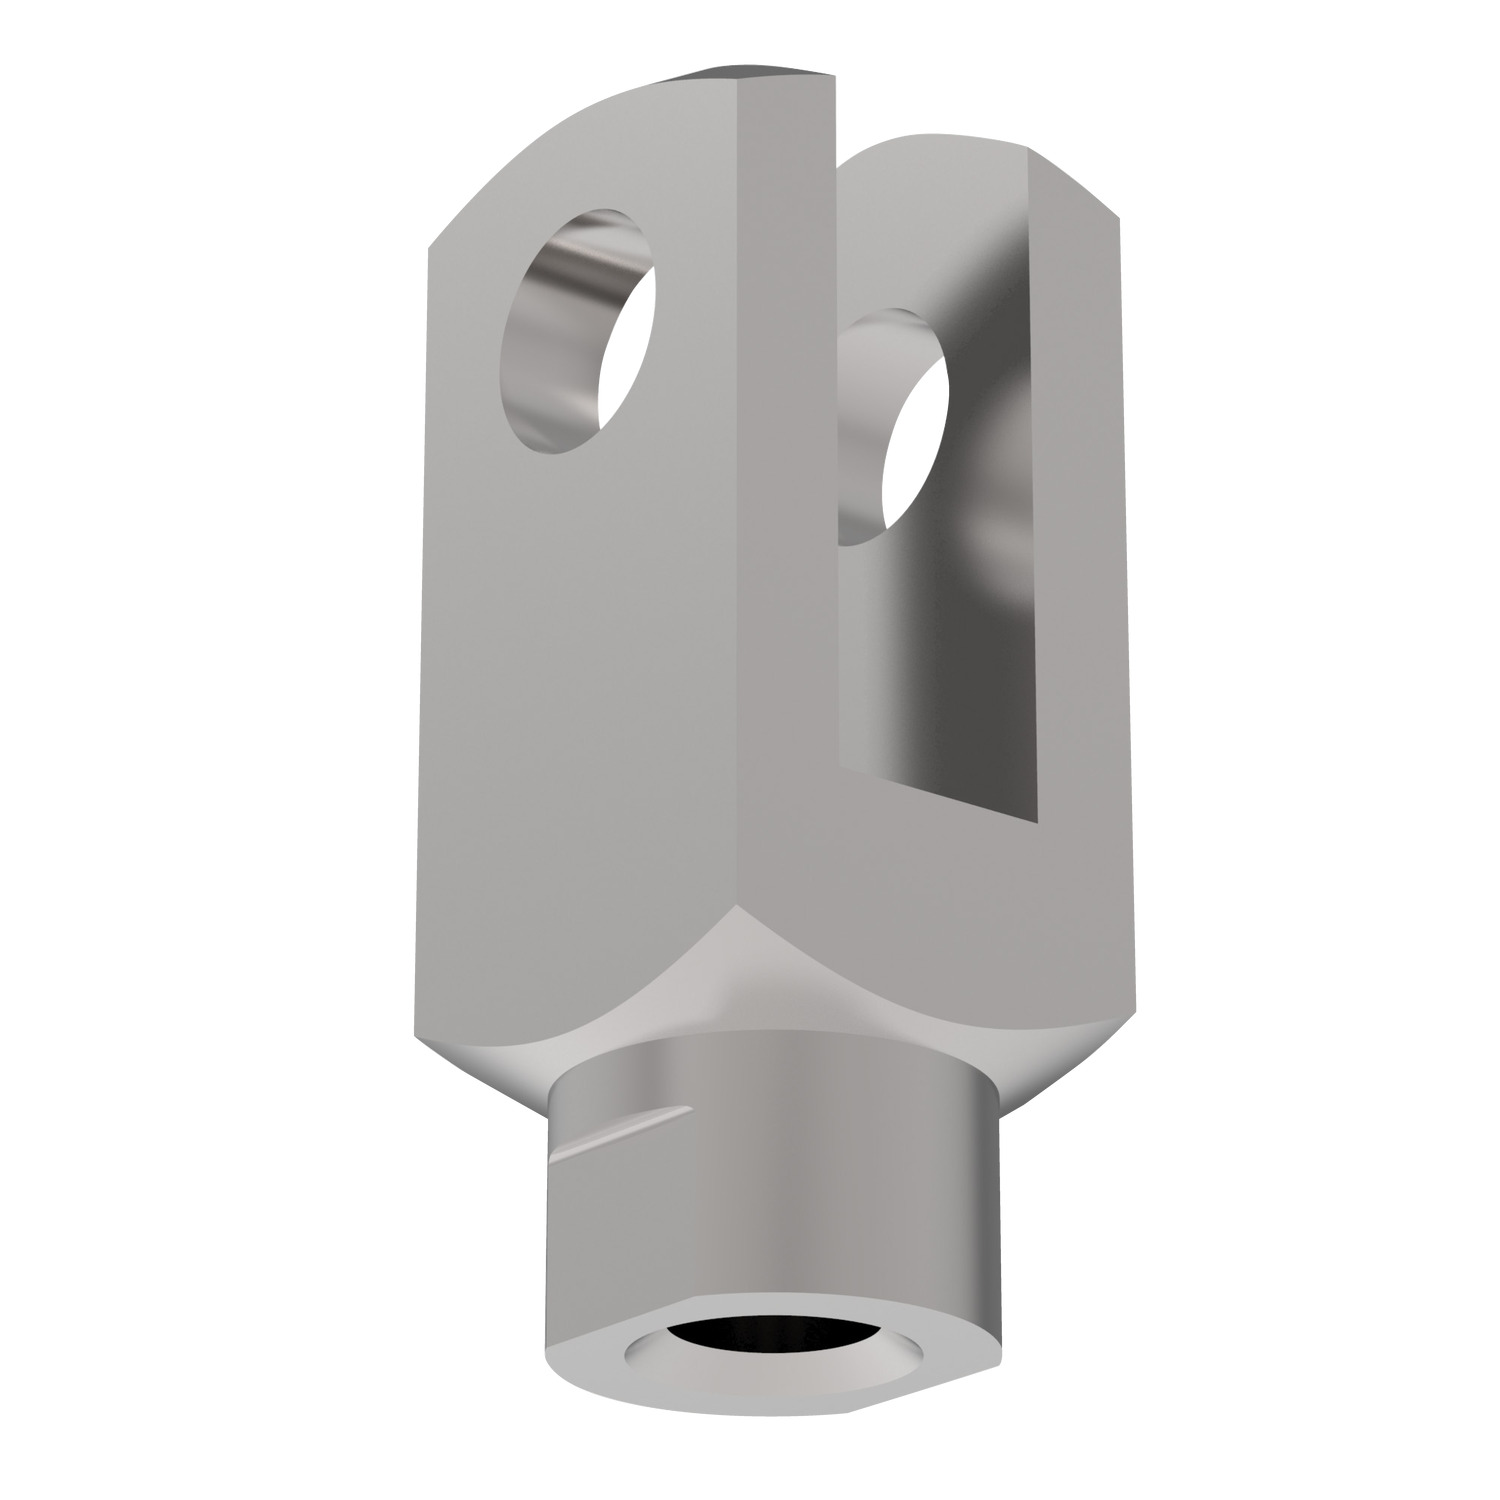 R3430 Rotating Clevis Joint